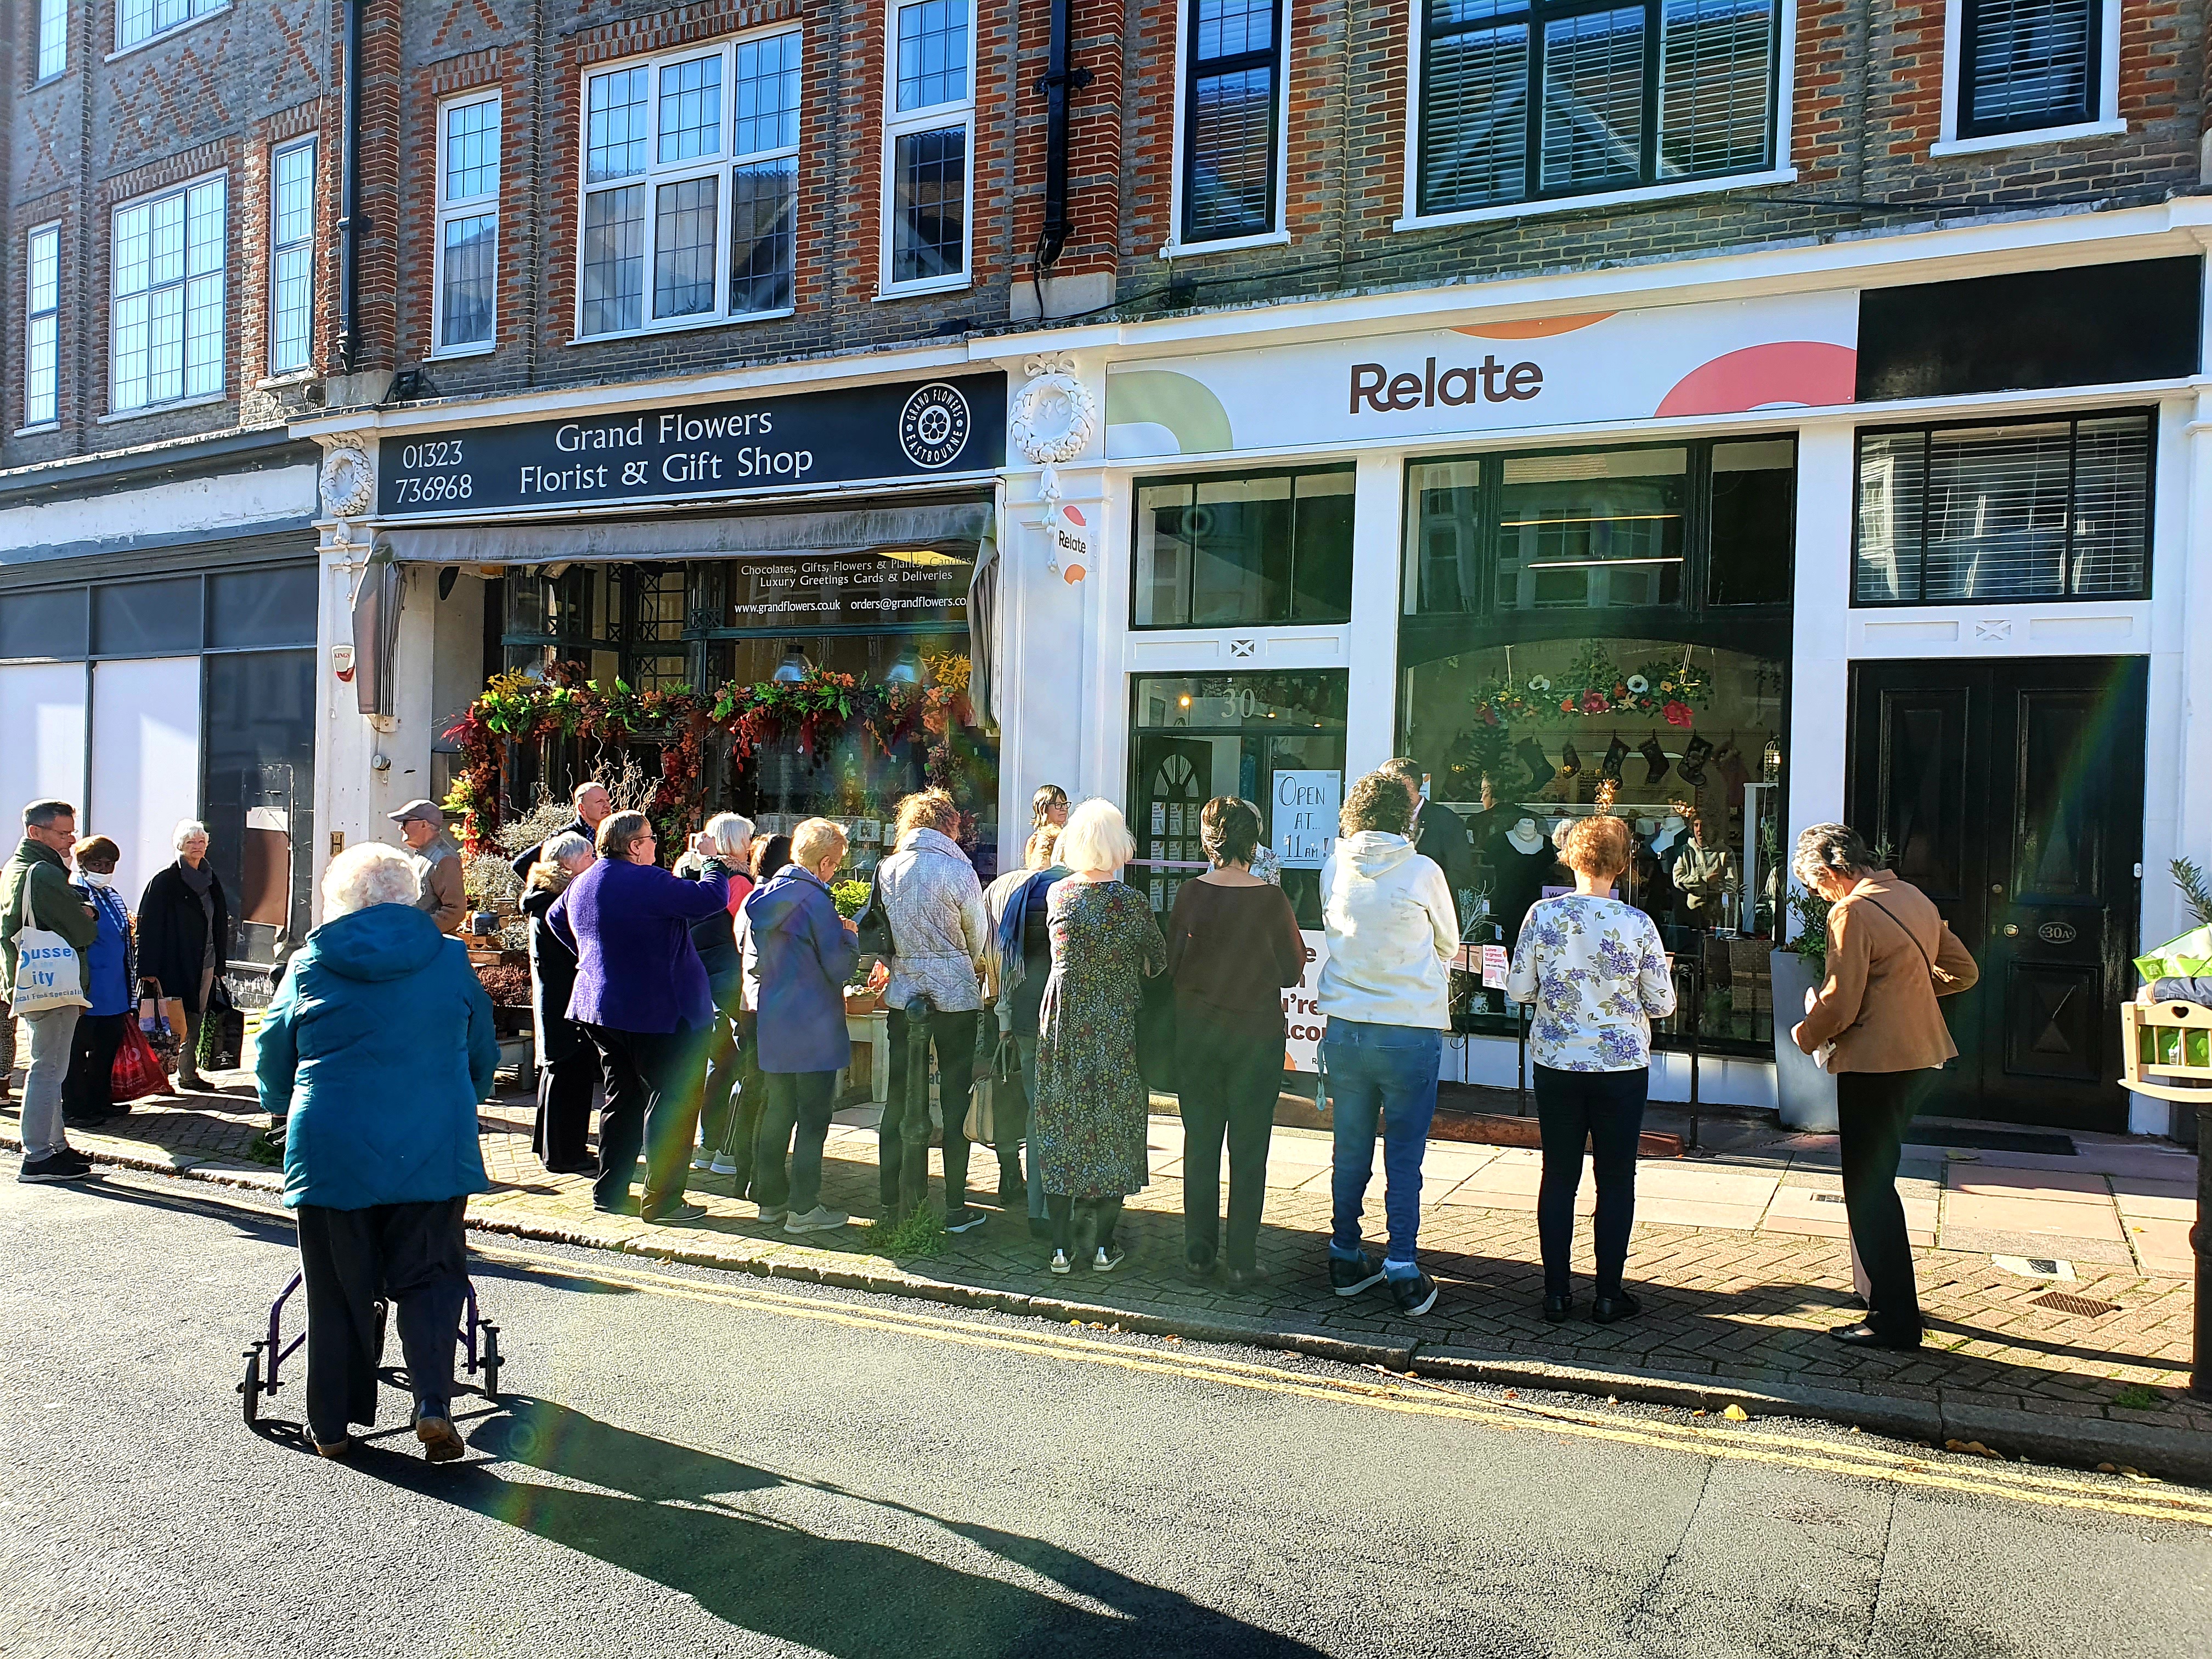 Crowd of people outside a charity shop, the sun is shining